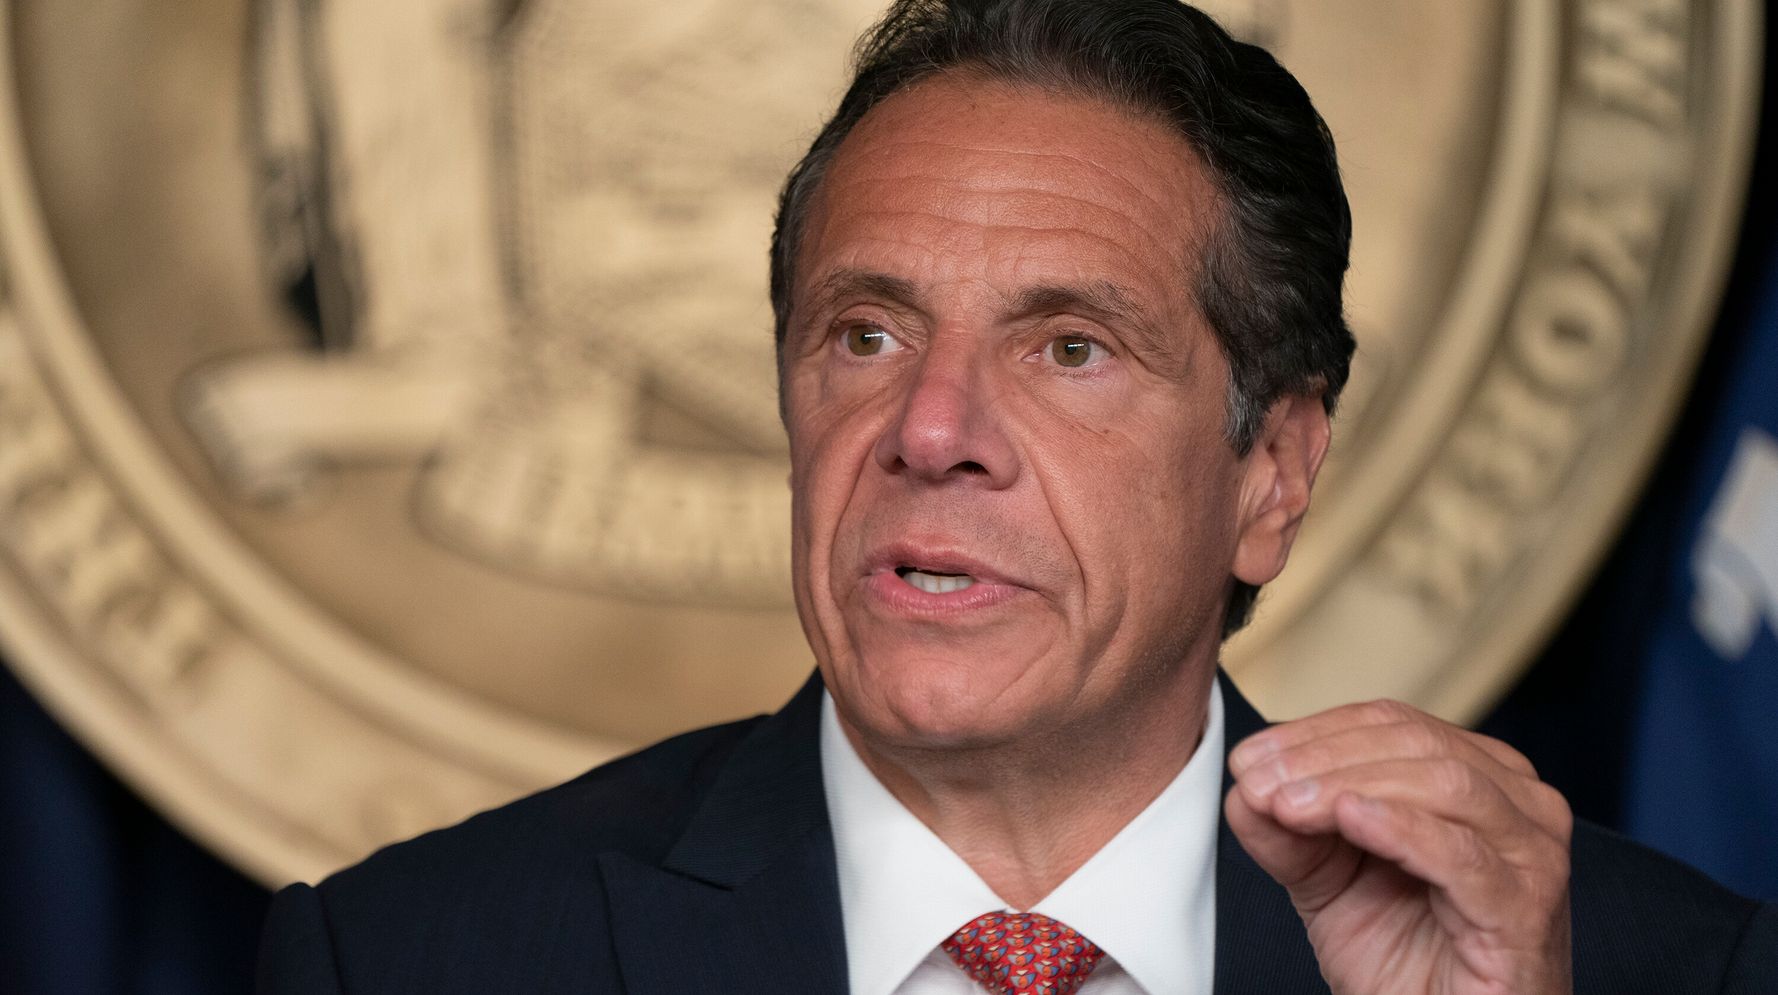 New York Gov. Andrew Cuomo Announces Resignation After Damning Harassment Report